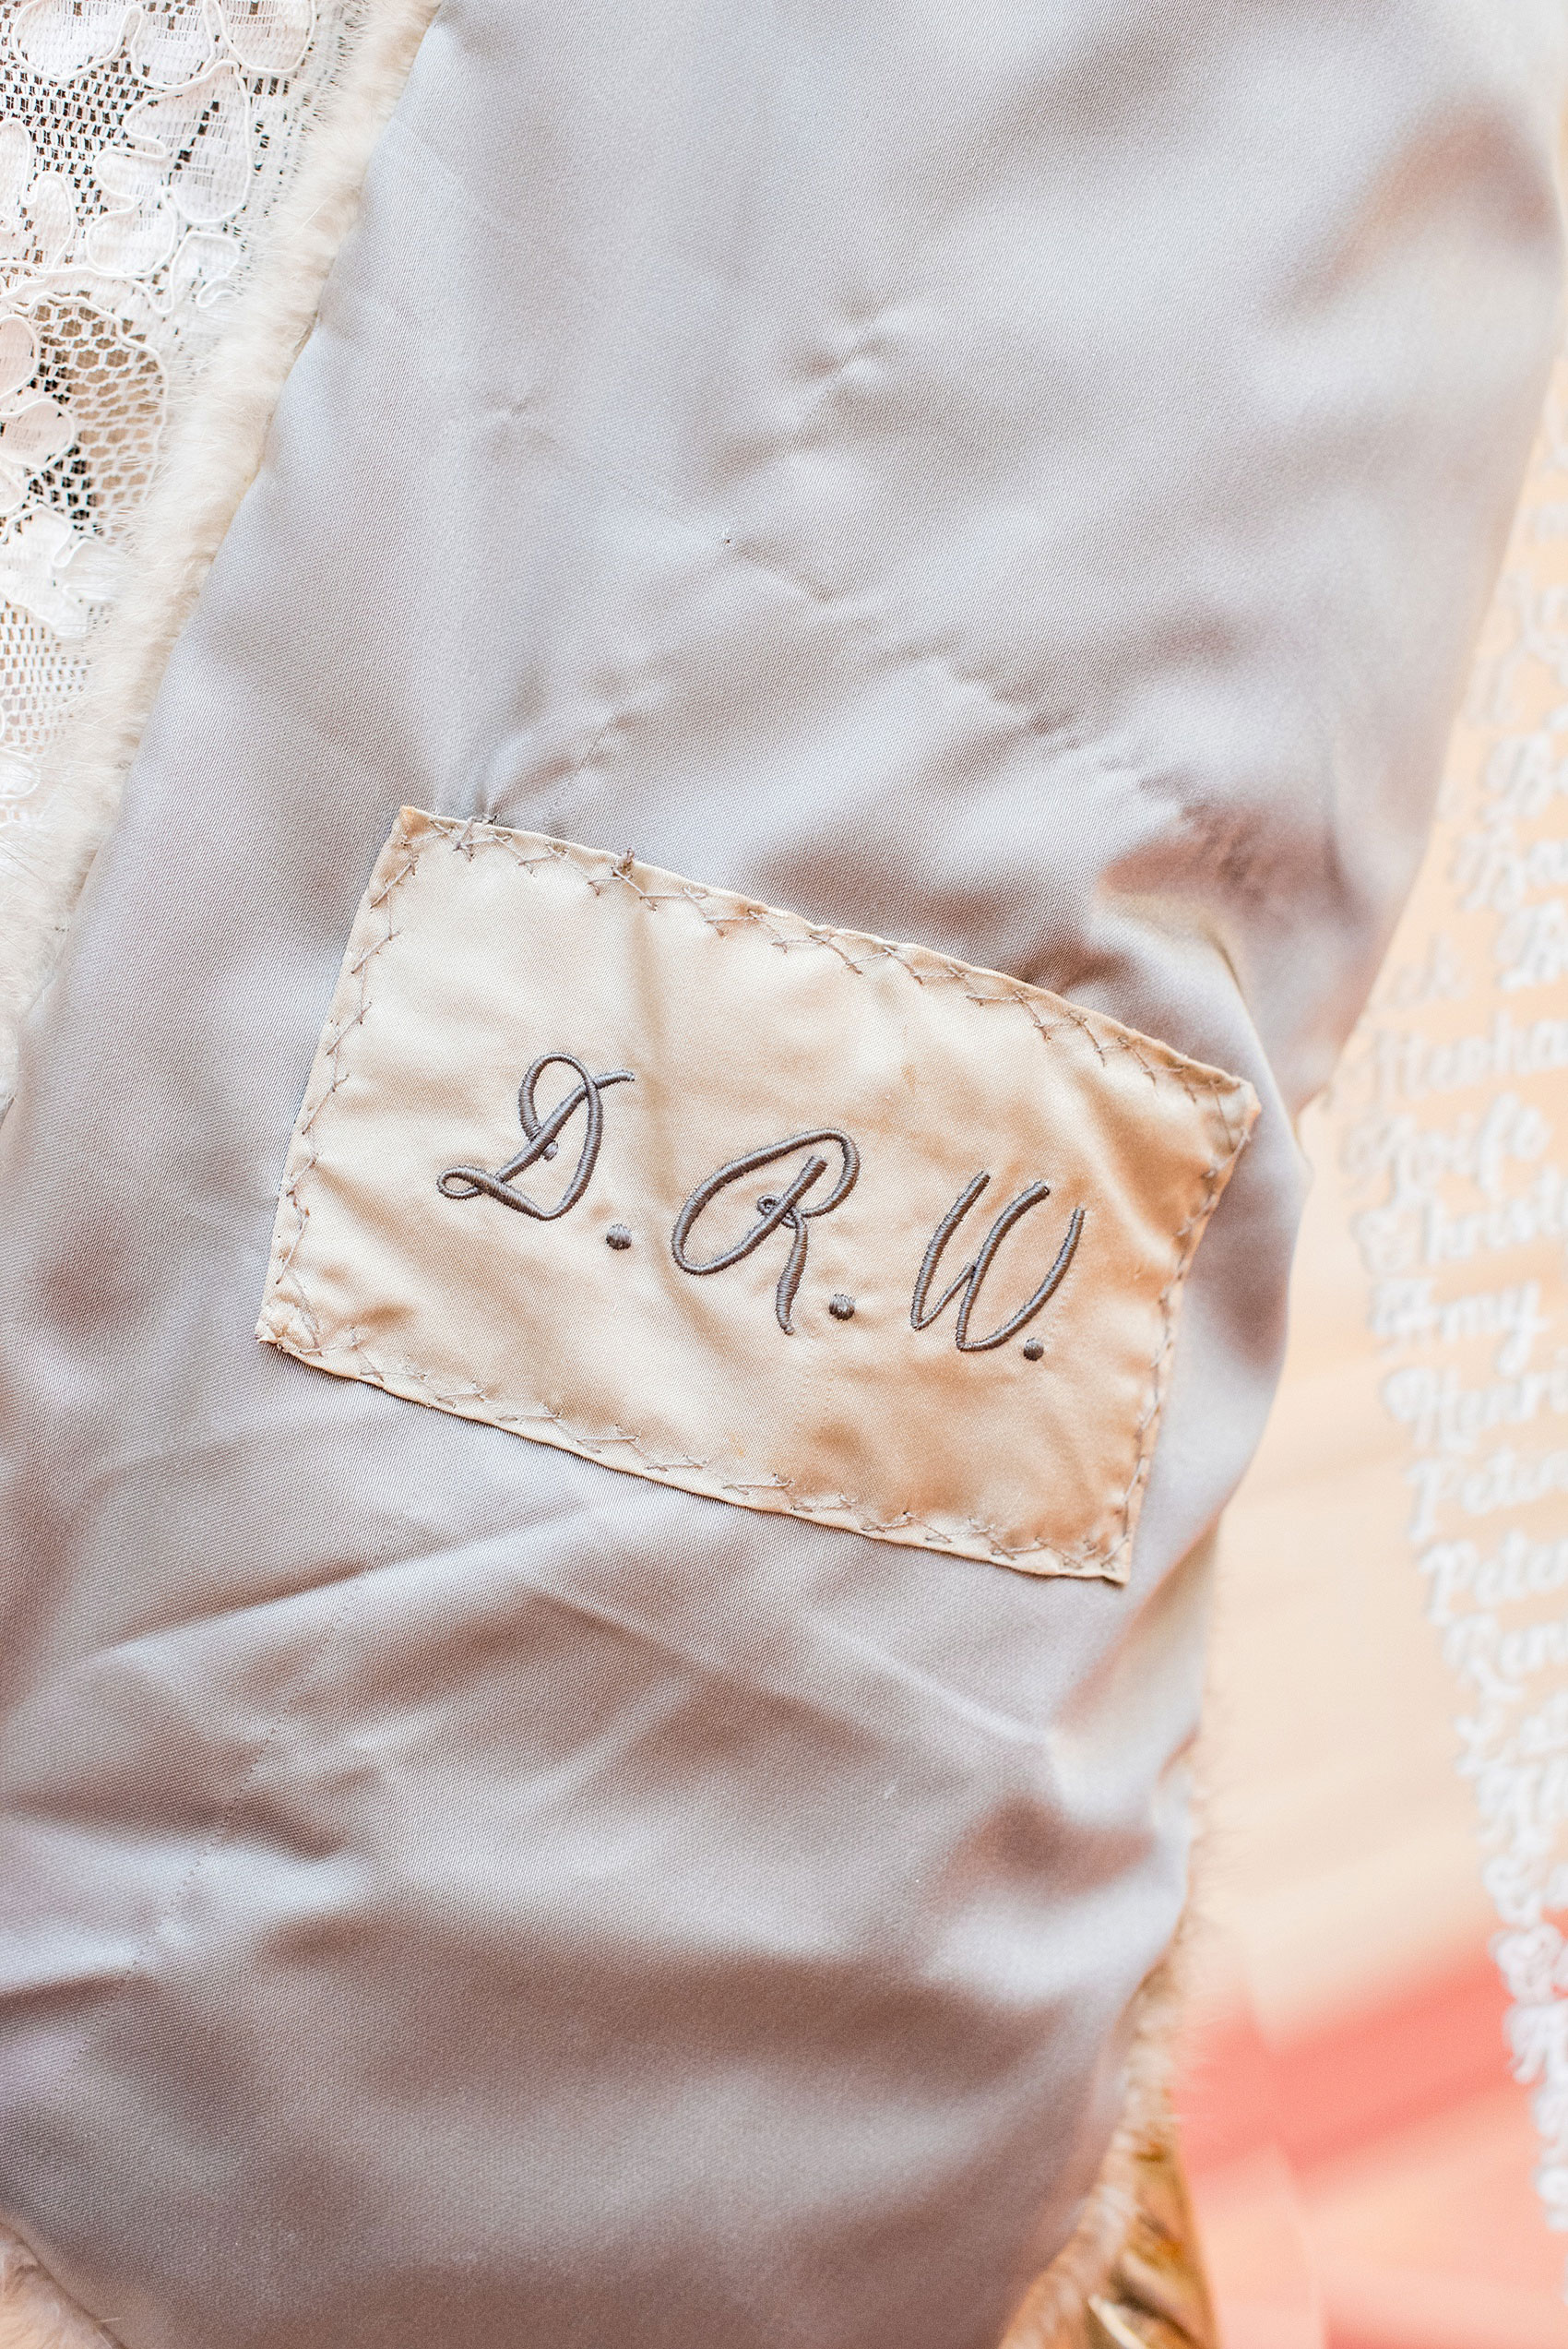 Beautiful wedding photos at The Carolina Inn at Chapel Hill, North Carolina by Mikkel Paige Photography. Photo of the bride's grandmother's initials in her heirloom fur shawl. #thecarolinainn #snowywedding